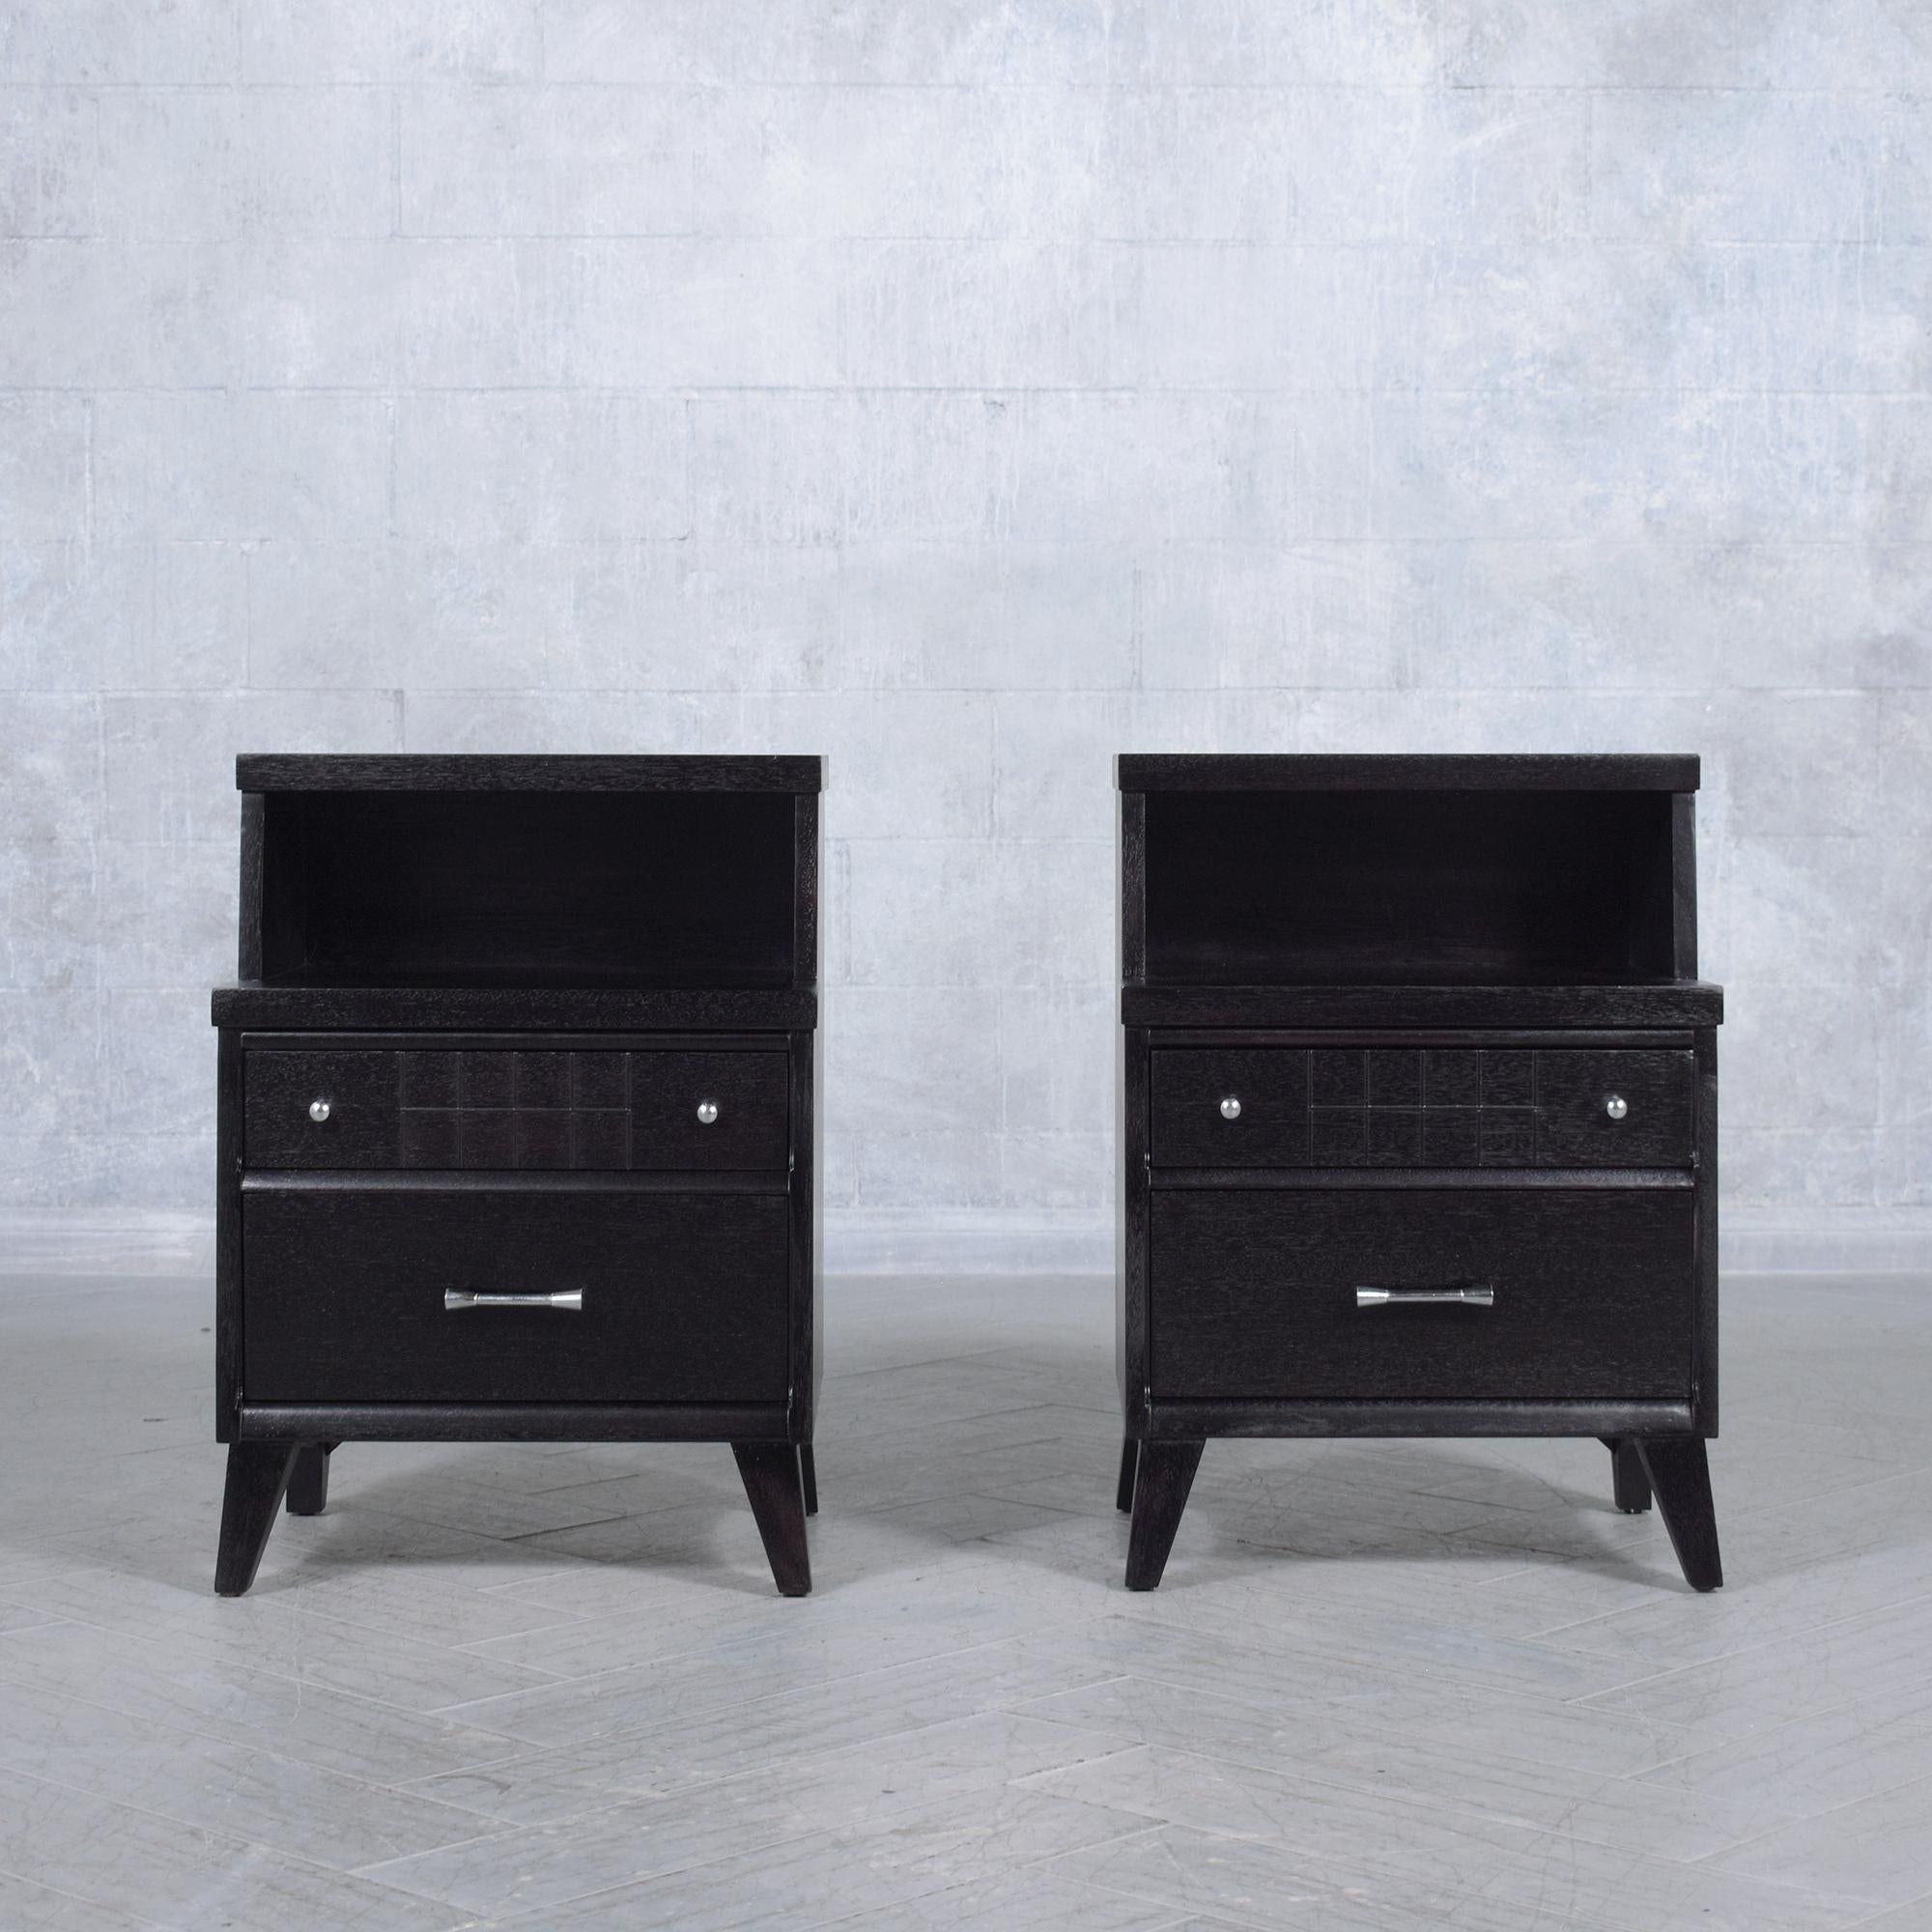 Hand-Crafted Vintage Mid-Century Modern Nightstands with Ebonized Finish and Chrome Hardware For Sale